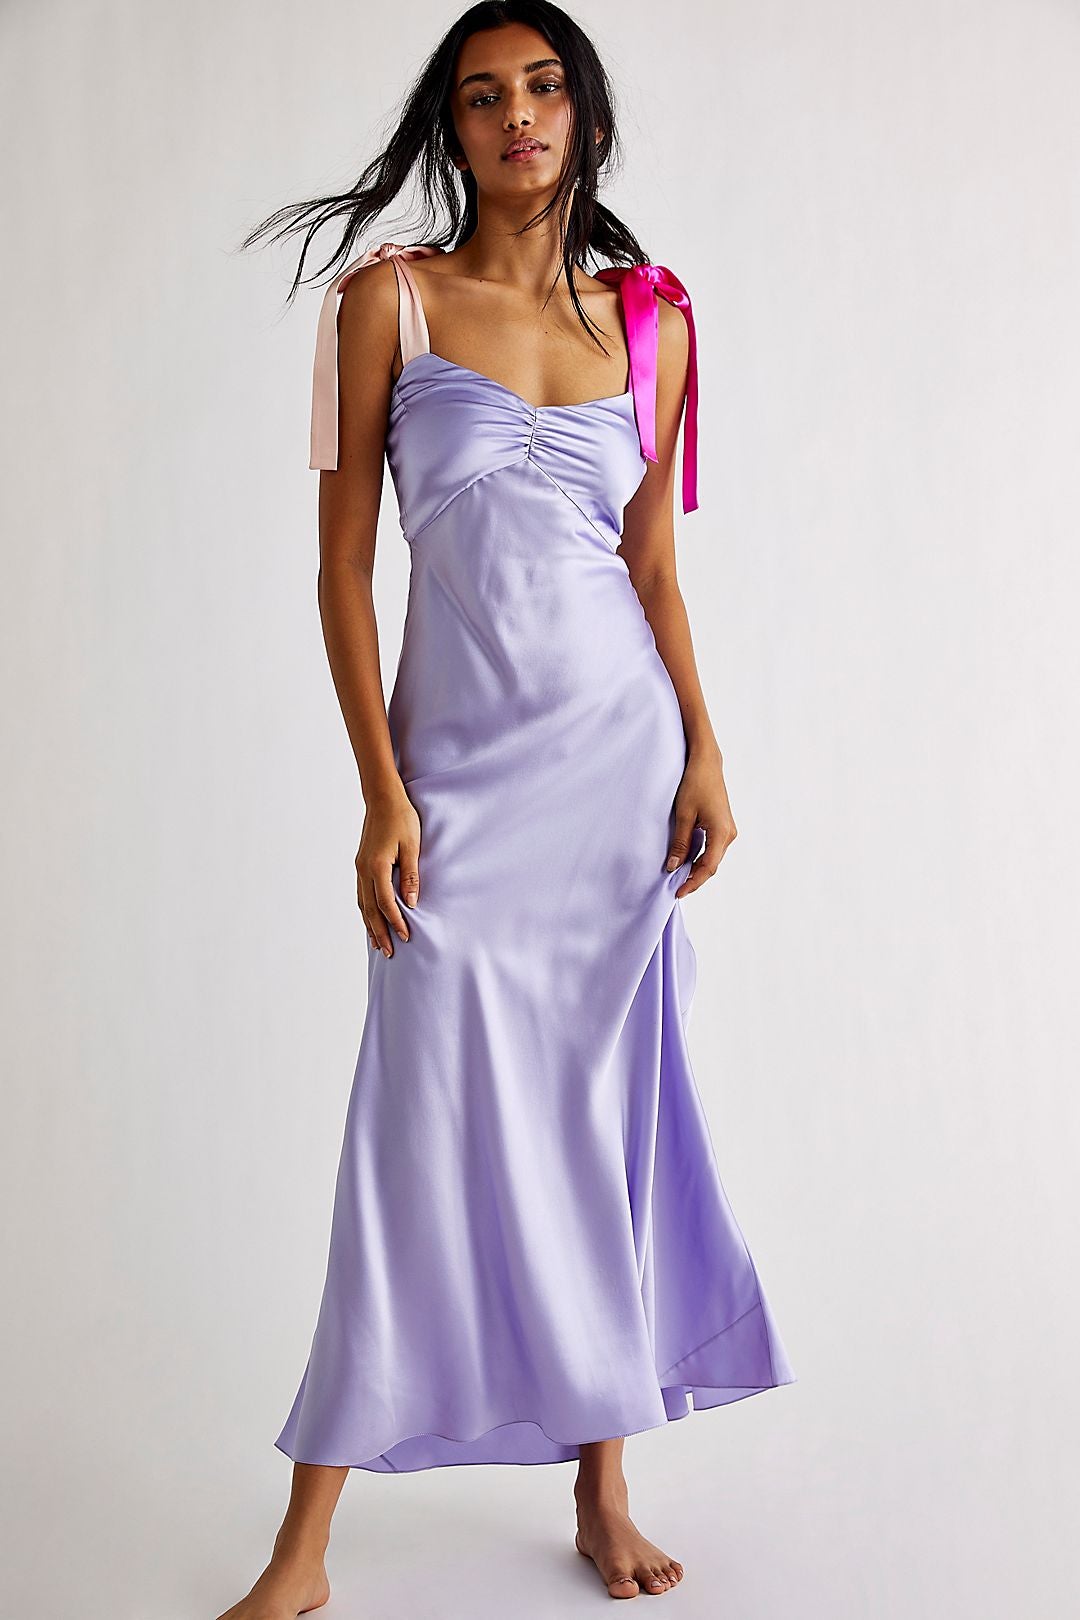 model wearing the lavender silk dress, which has one light pink silk strap and one dark pink silk strap